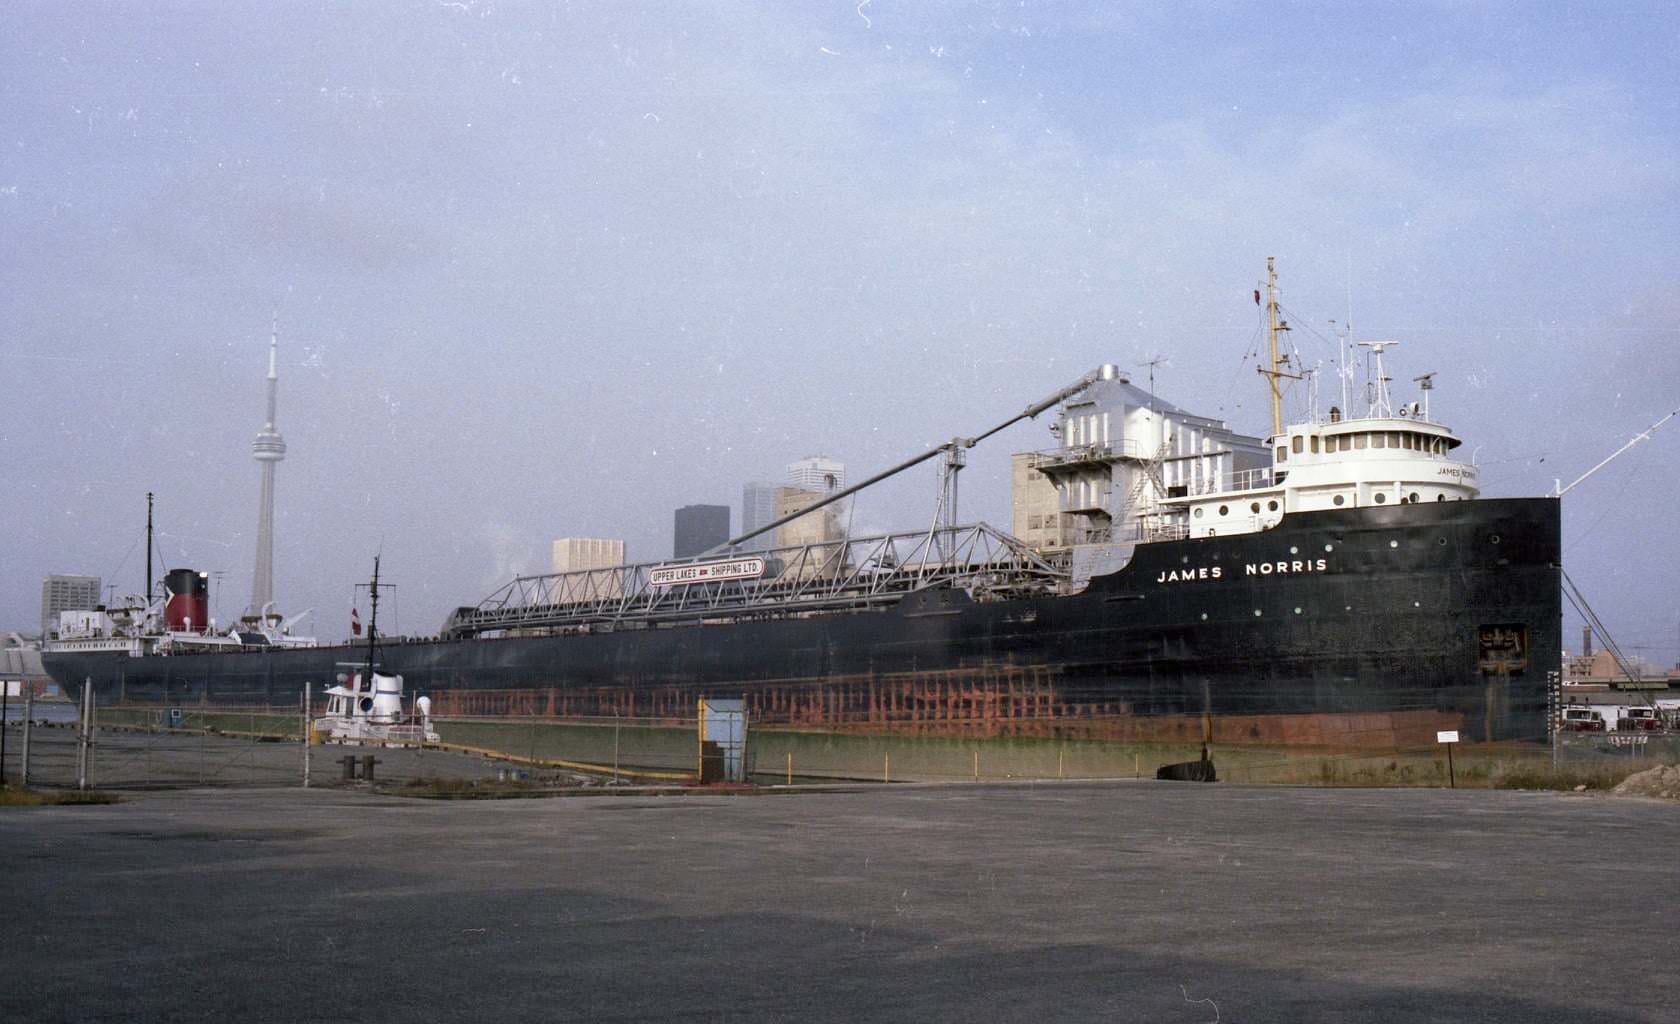 Exploring the port in 1981.